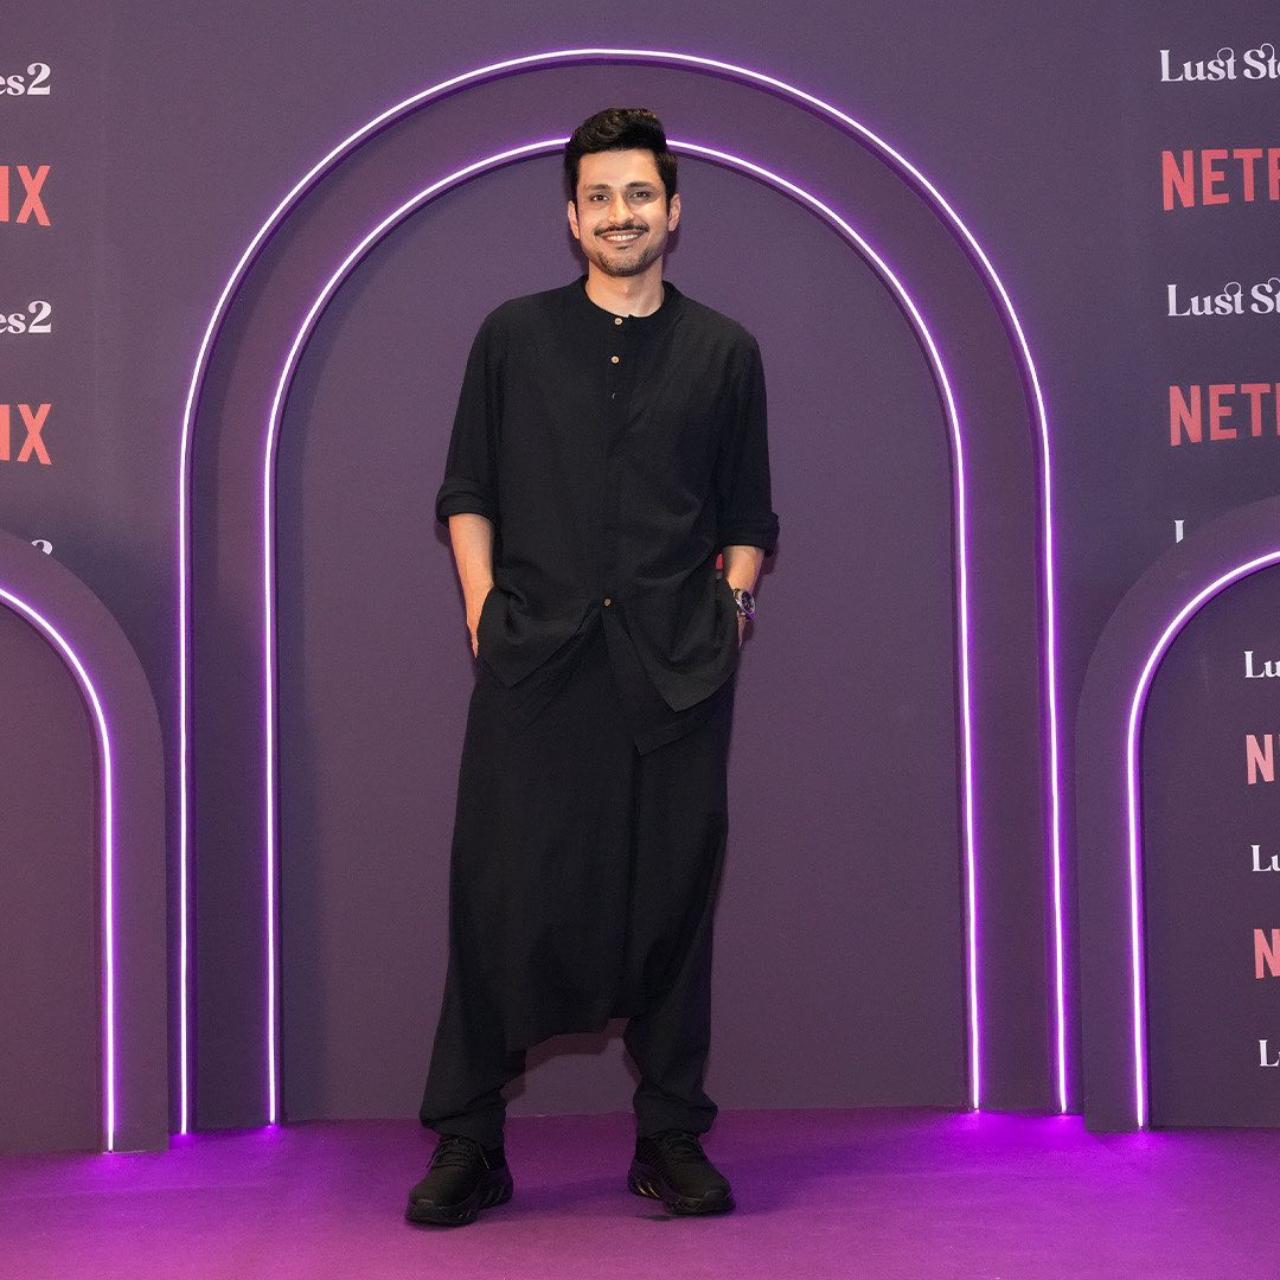 Actor Amol Parashar looked dapper in this black outfit